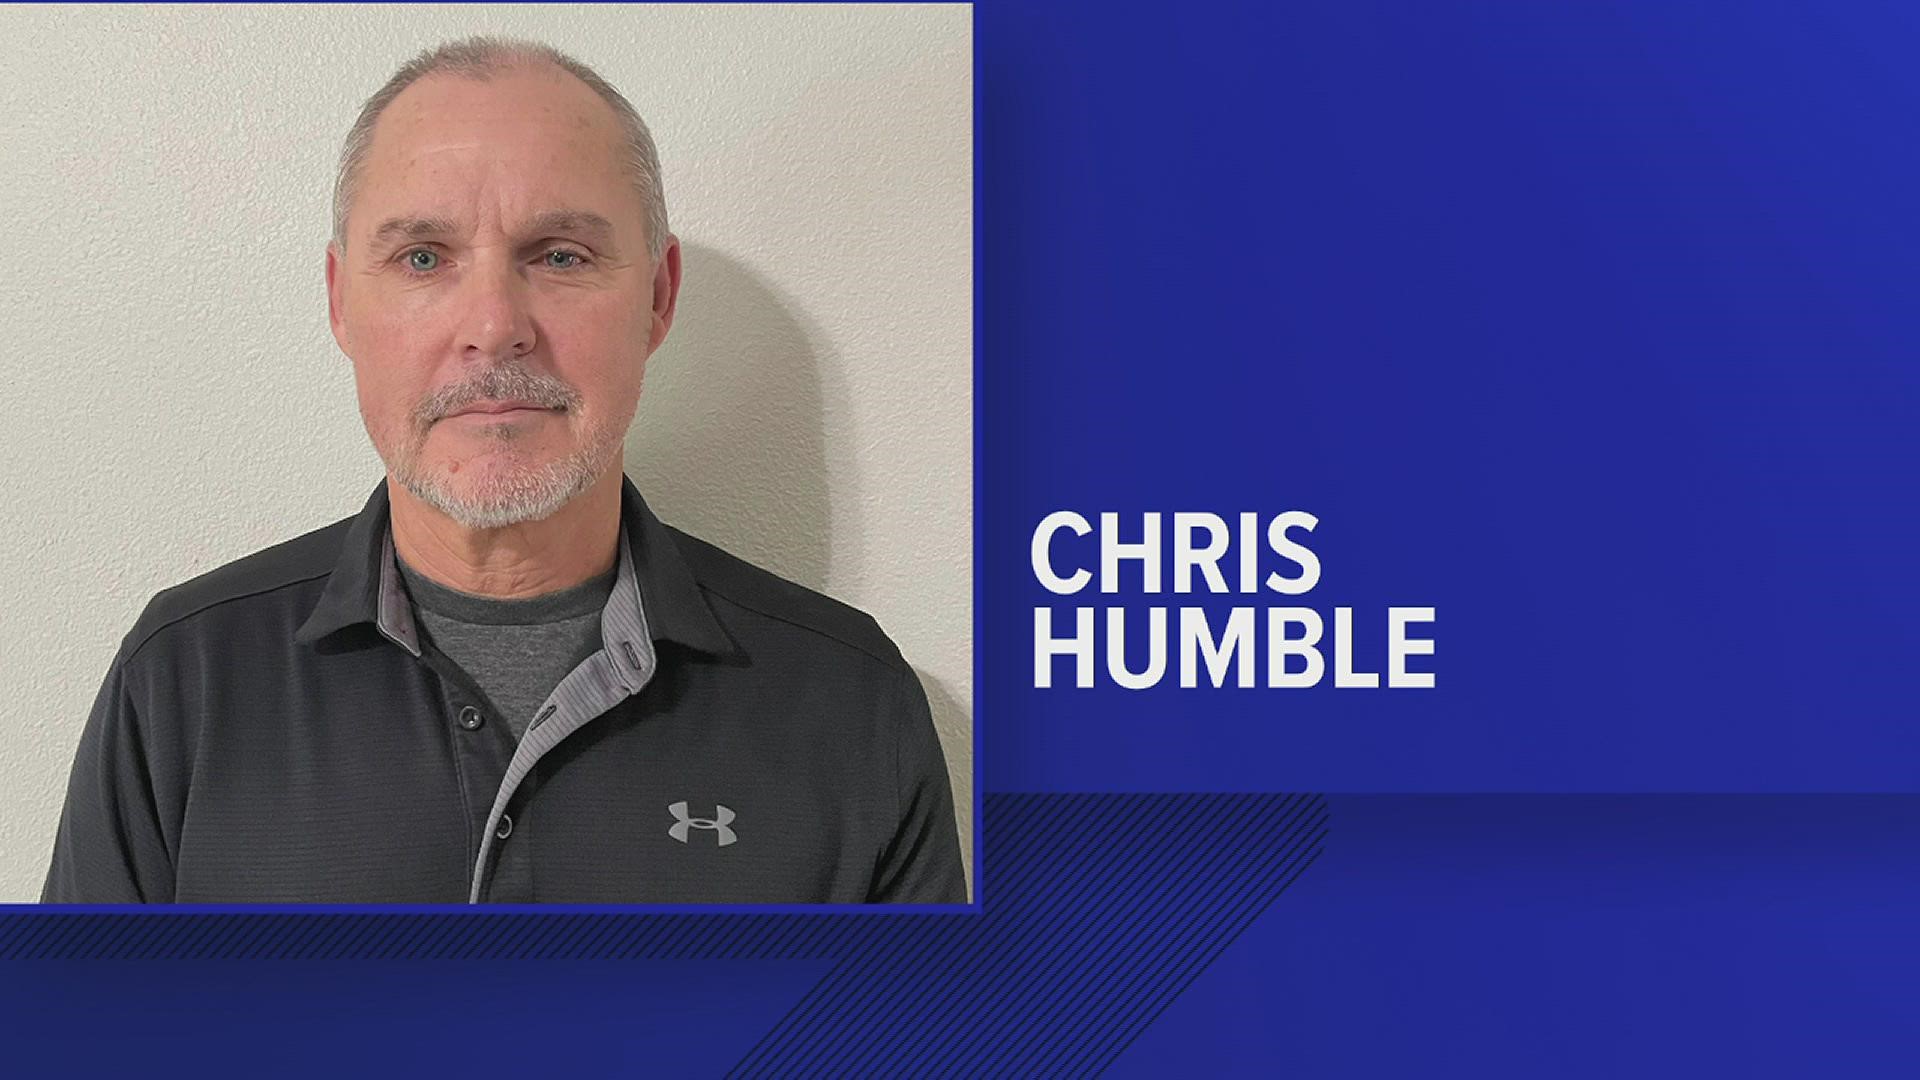 Chris Humble will be the new chief of the Pinehurst Police Department after Chief Jimmy LeBouef retires.